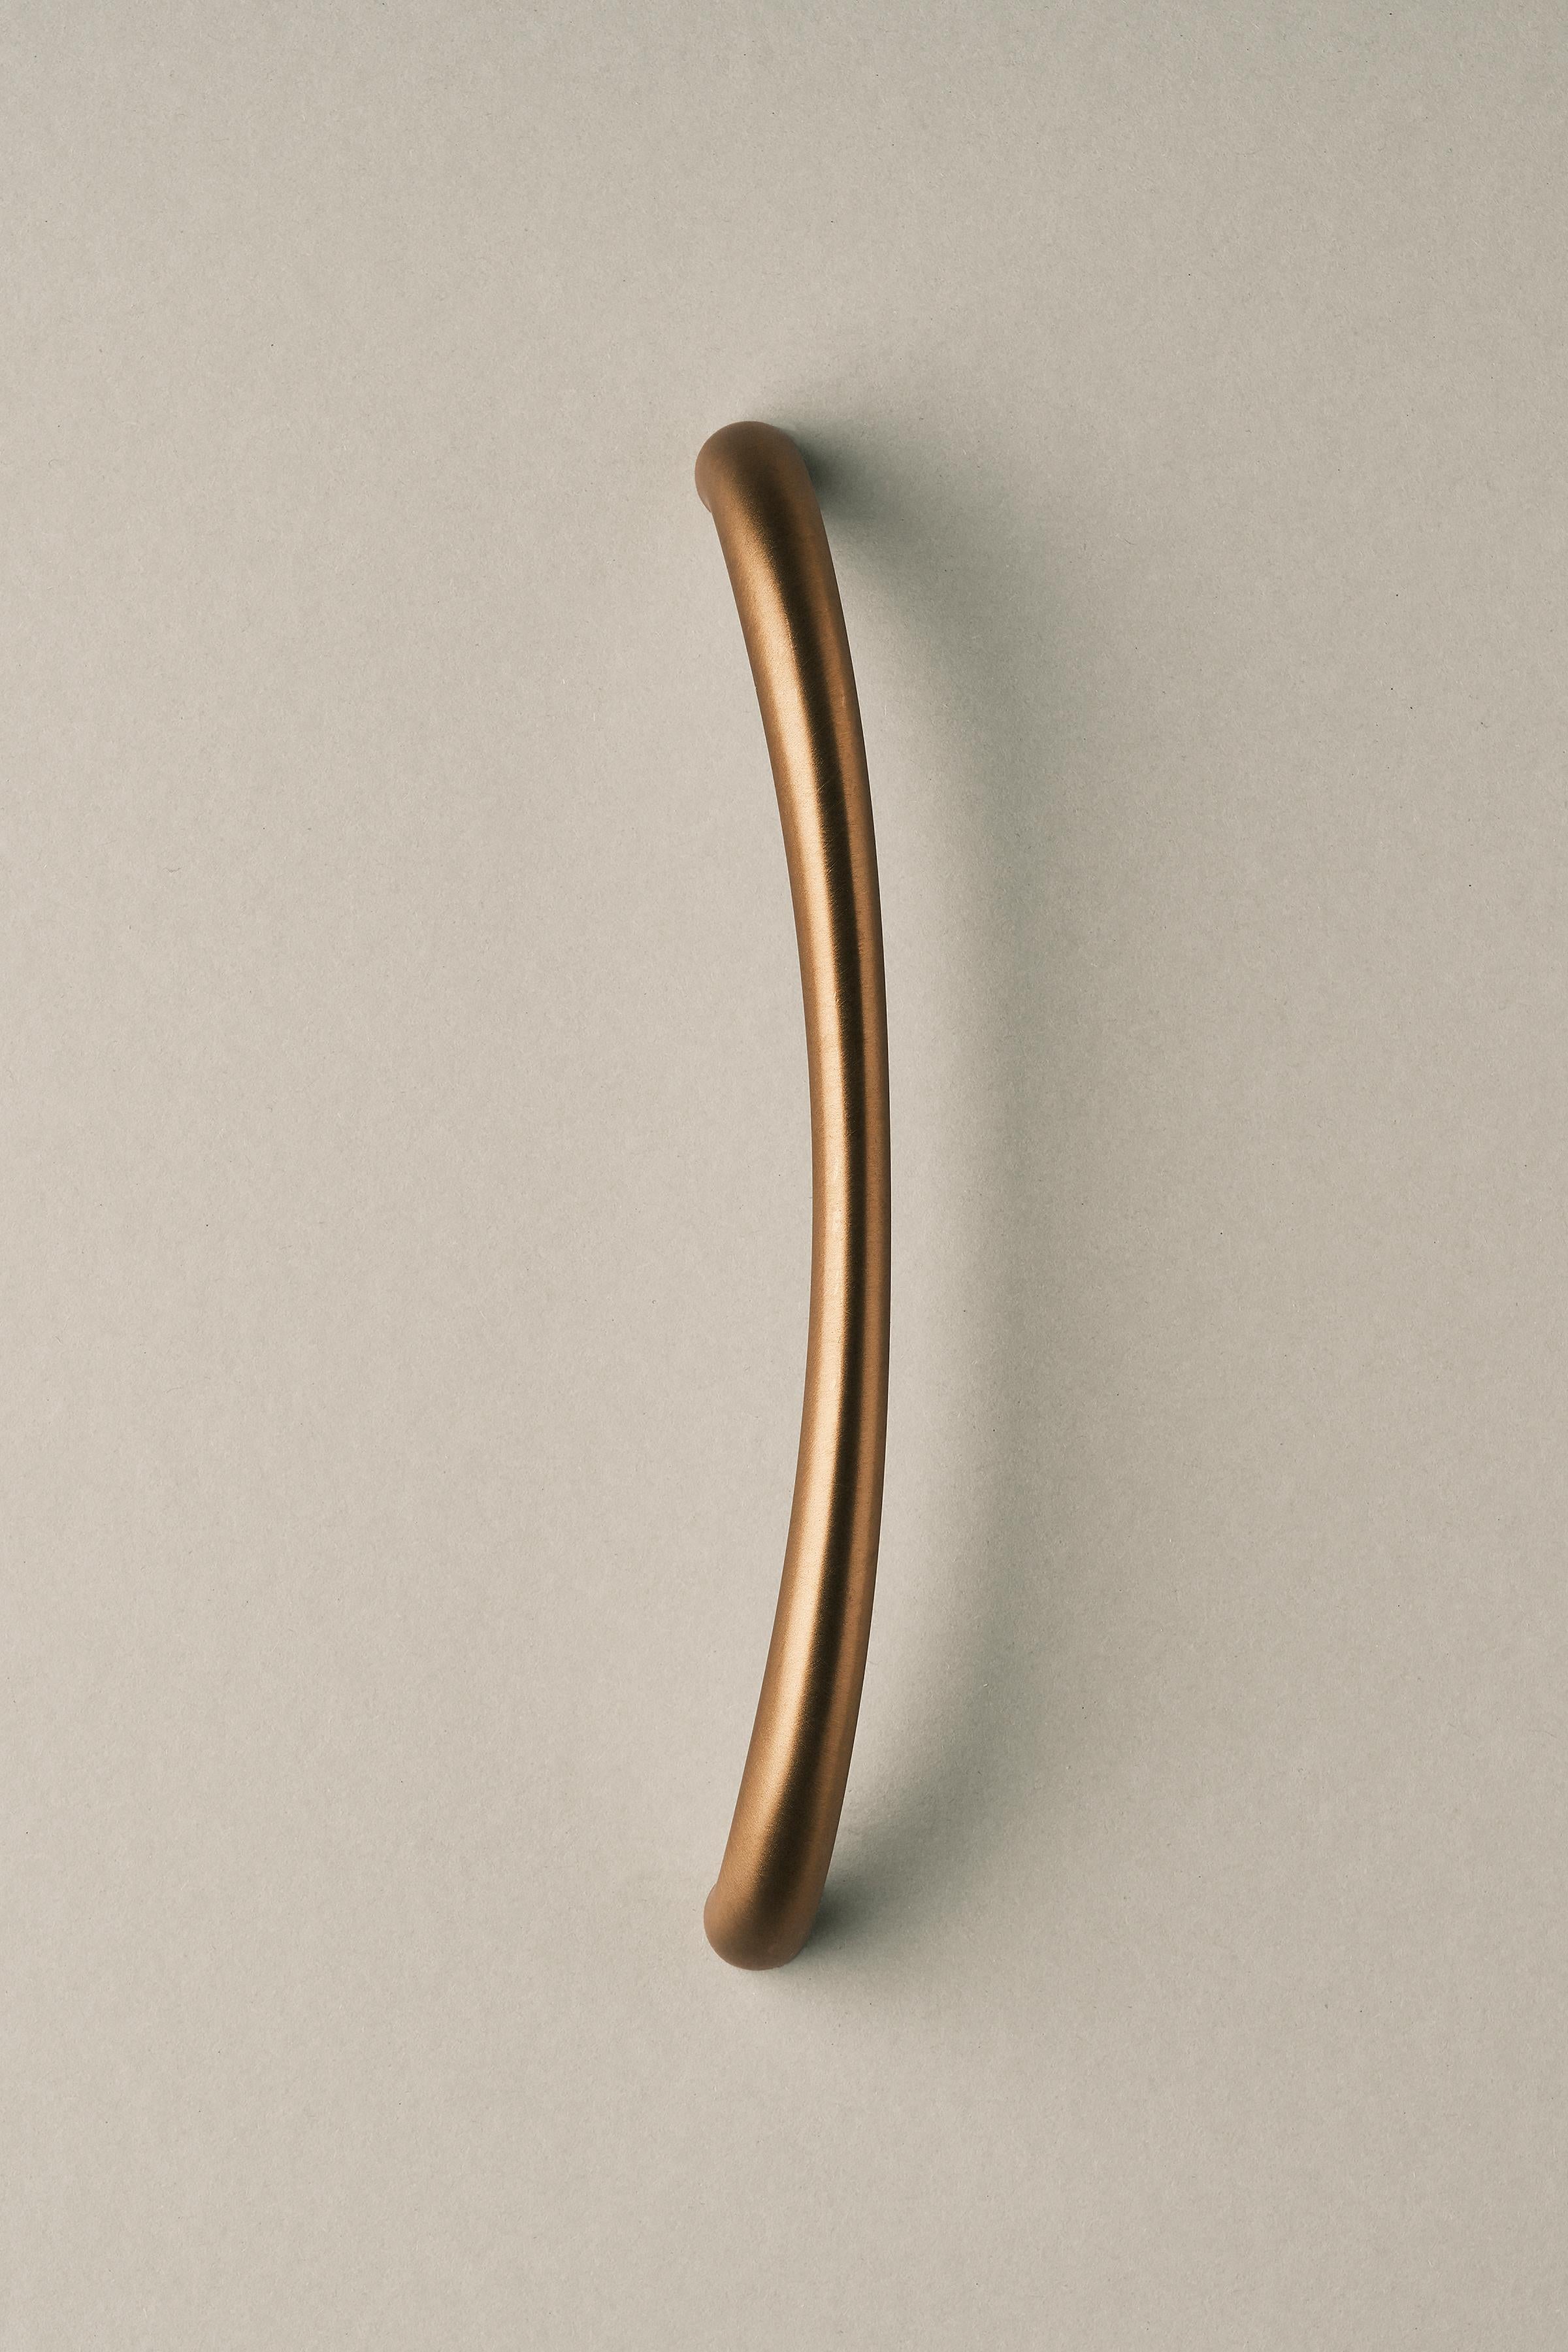 Contemporary Door Handle / Knob 'Suave' by Spaces Within, Amber Brass For Sale 2